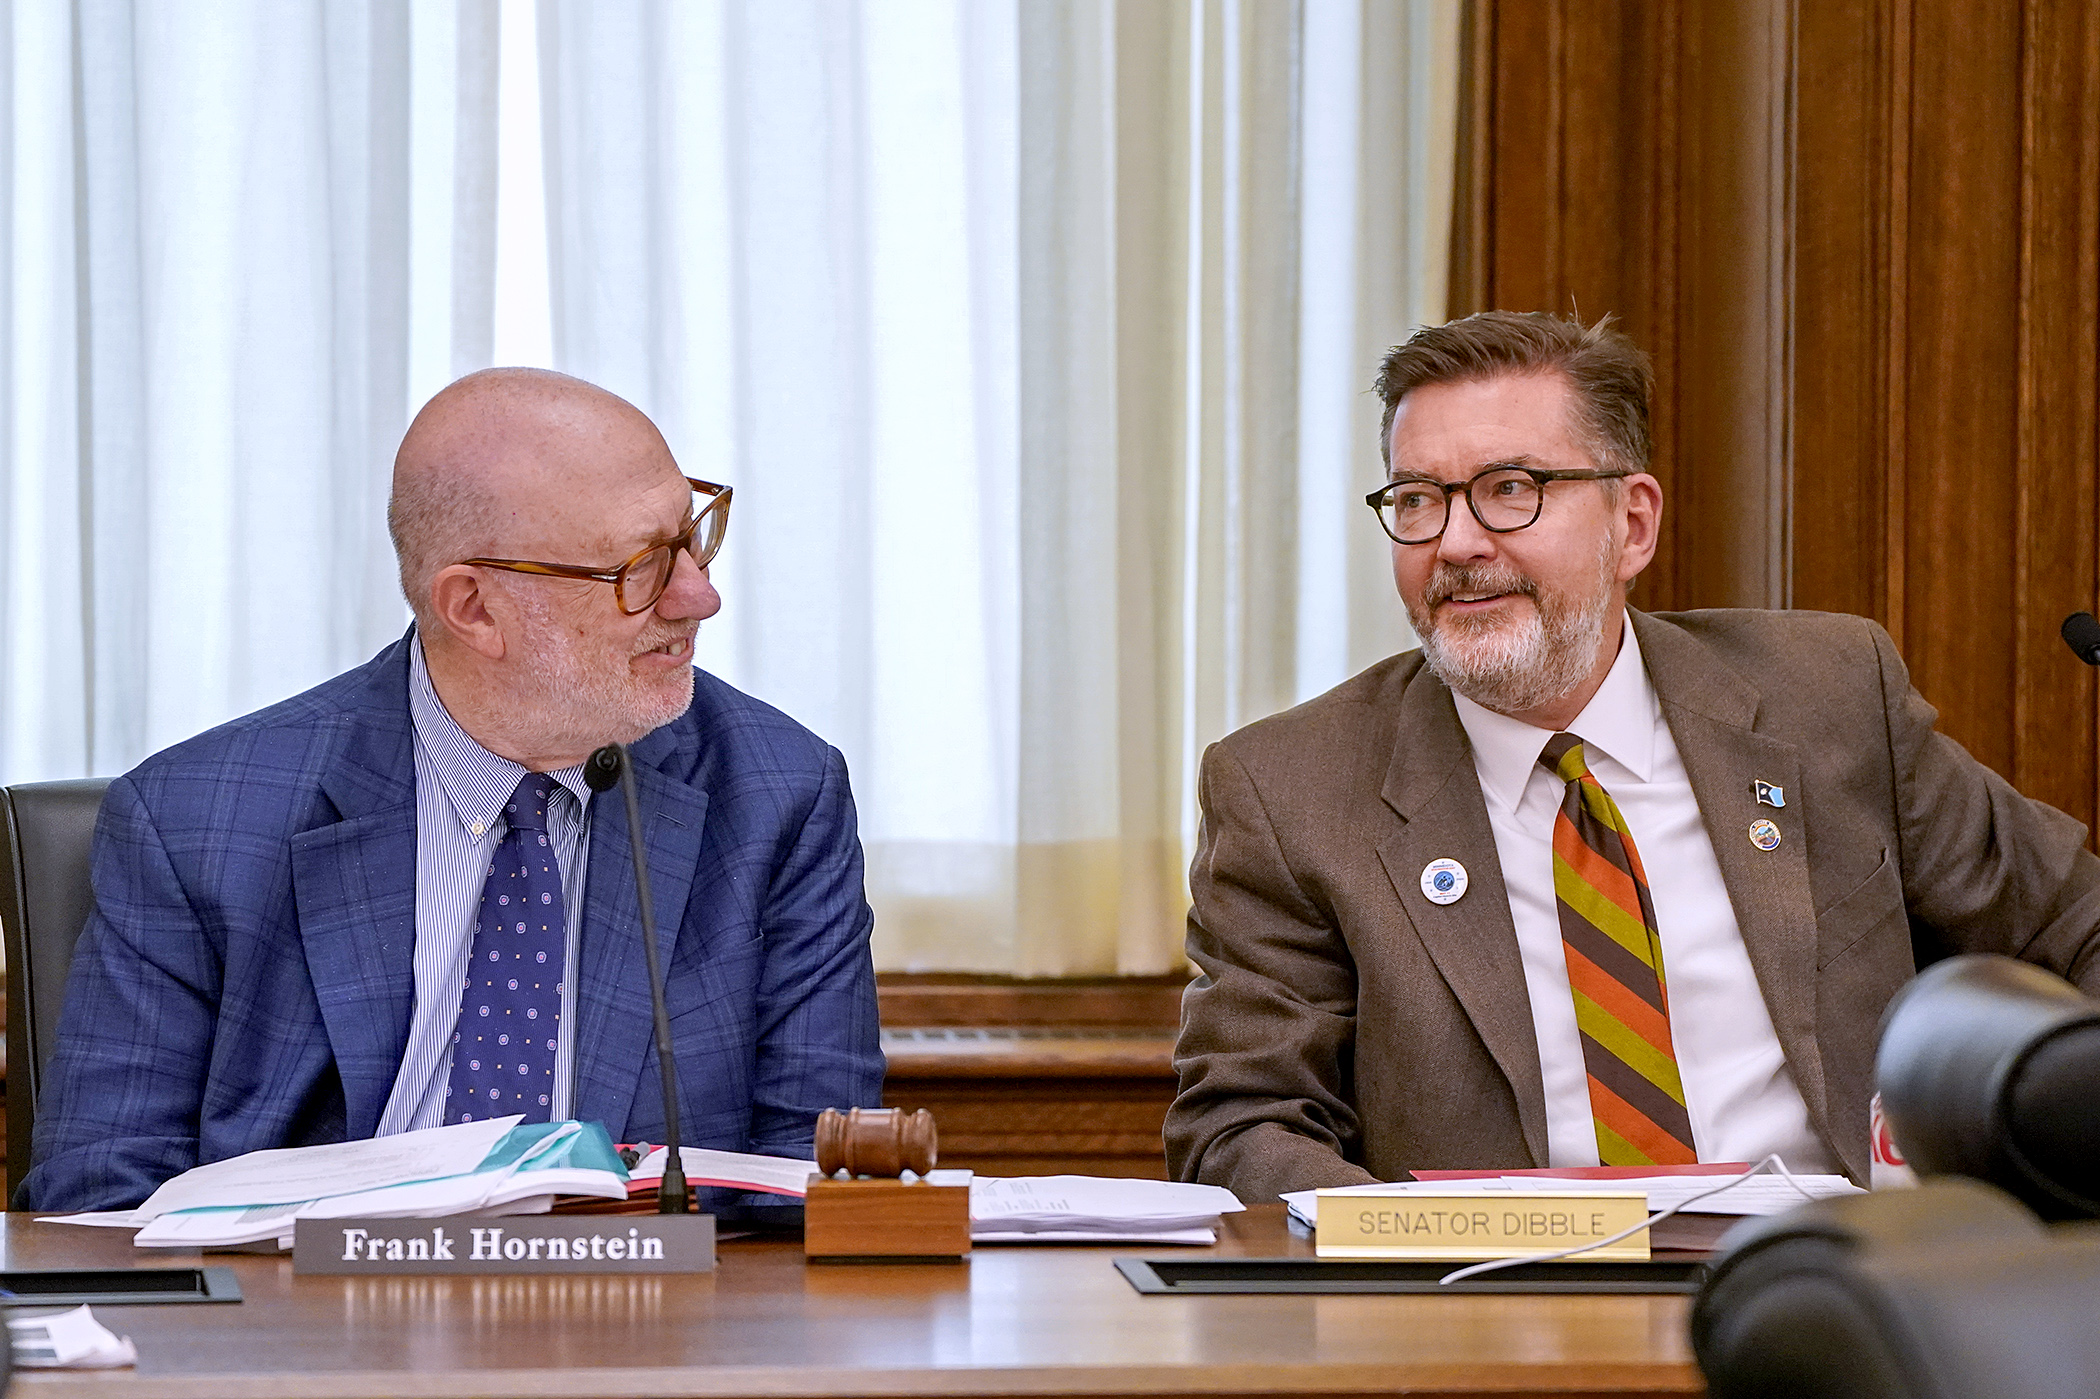 Rep. Frank Hornstein and Sen. D. Scott Dibble chat before convening the May 10 meeting of the conference committee for HF5242 – the transportation, labor and housing supplemental budget bill. (Photo by Michele Jokinen)